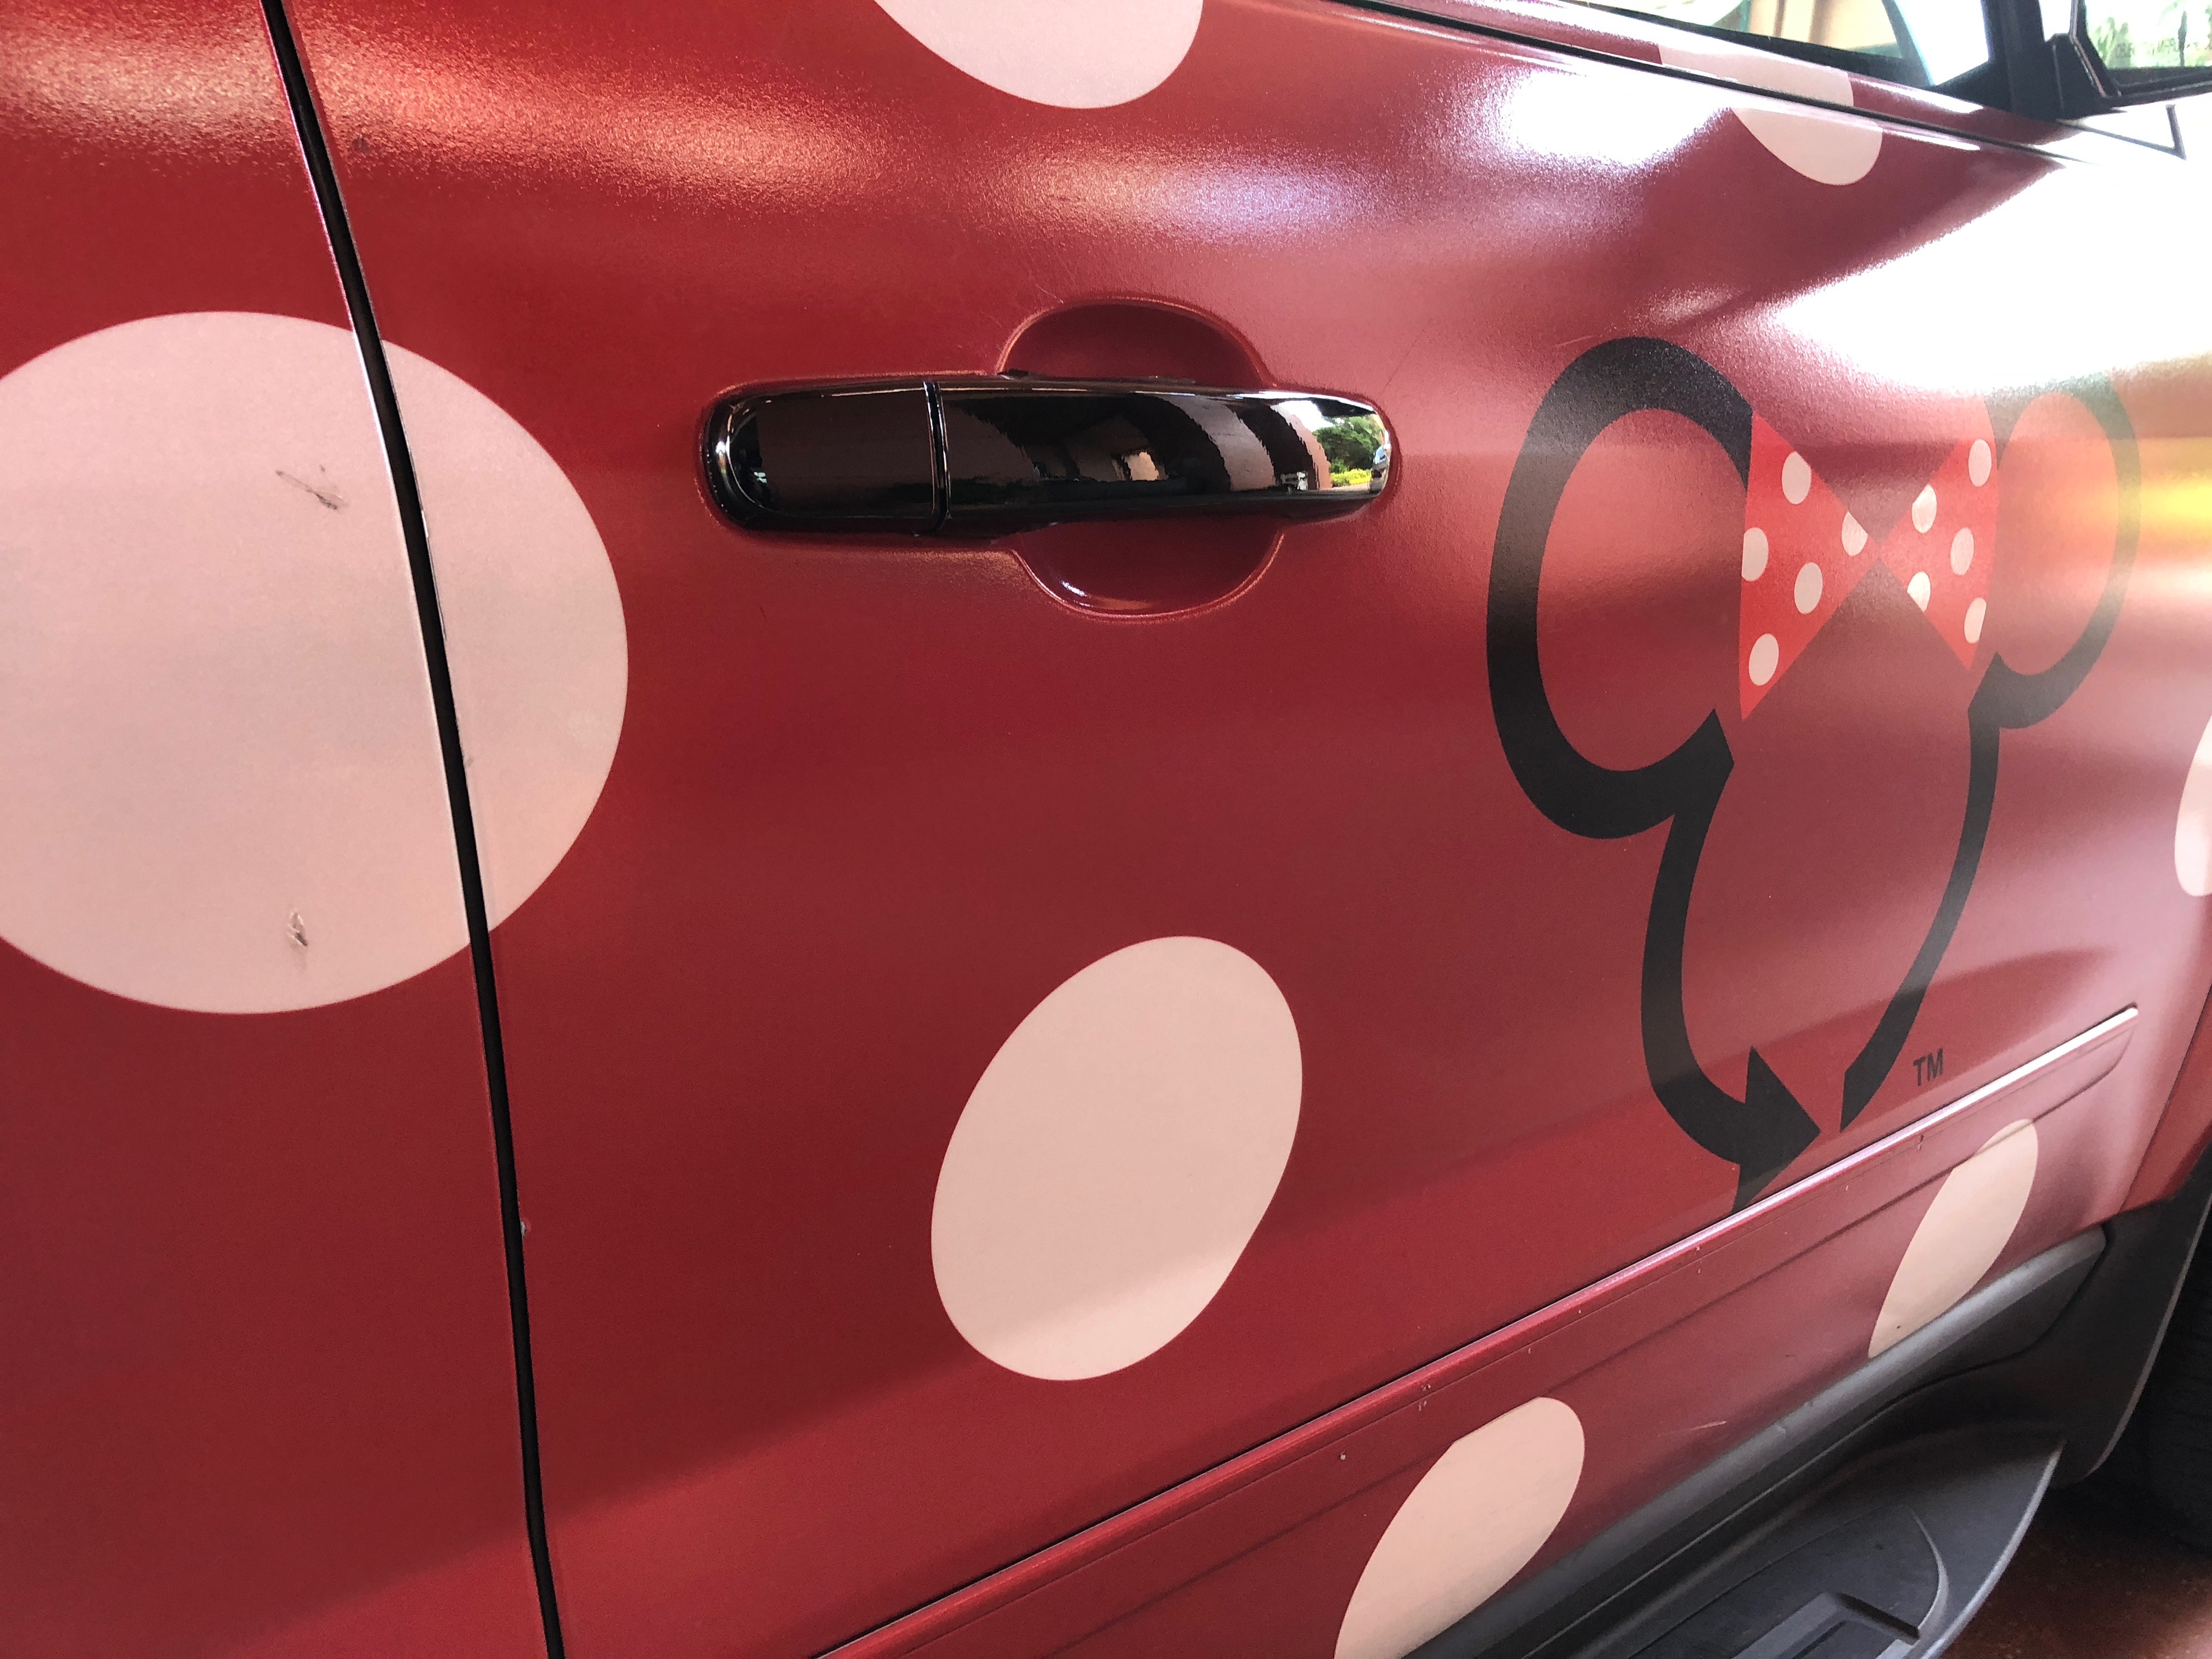 a red car with white polka dots and a cartoon mouse